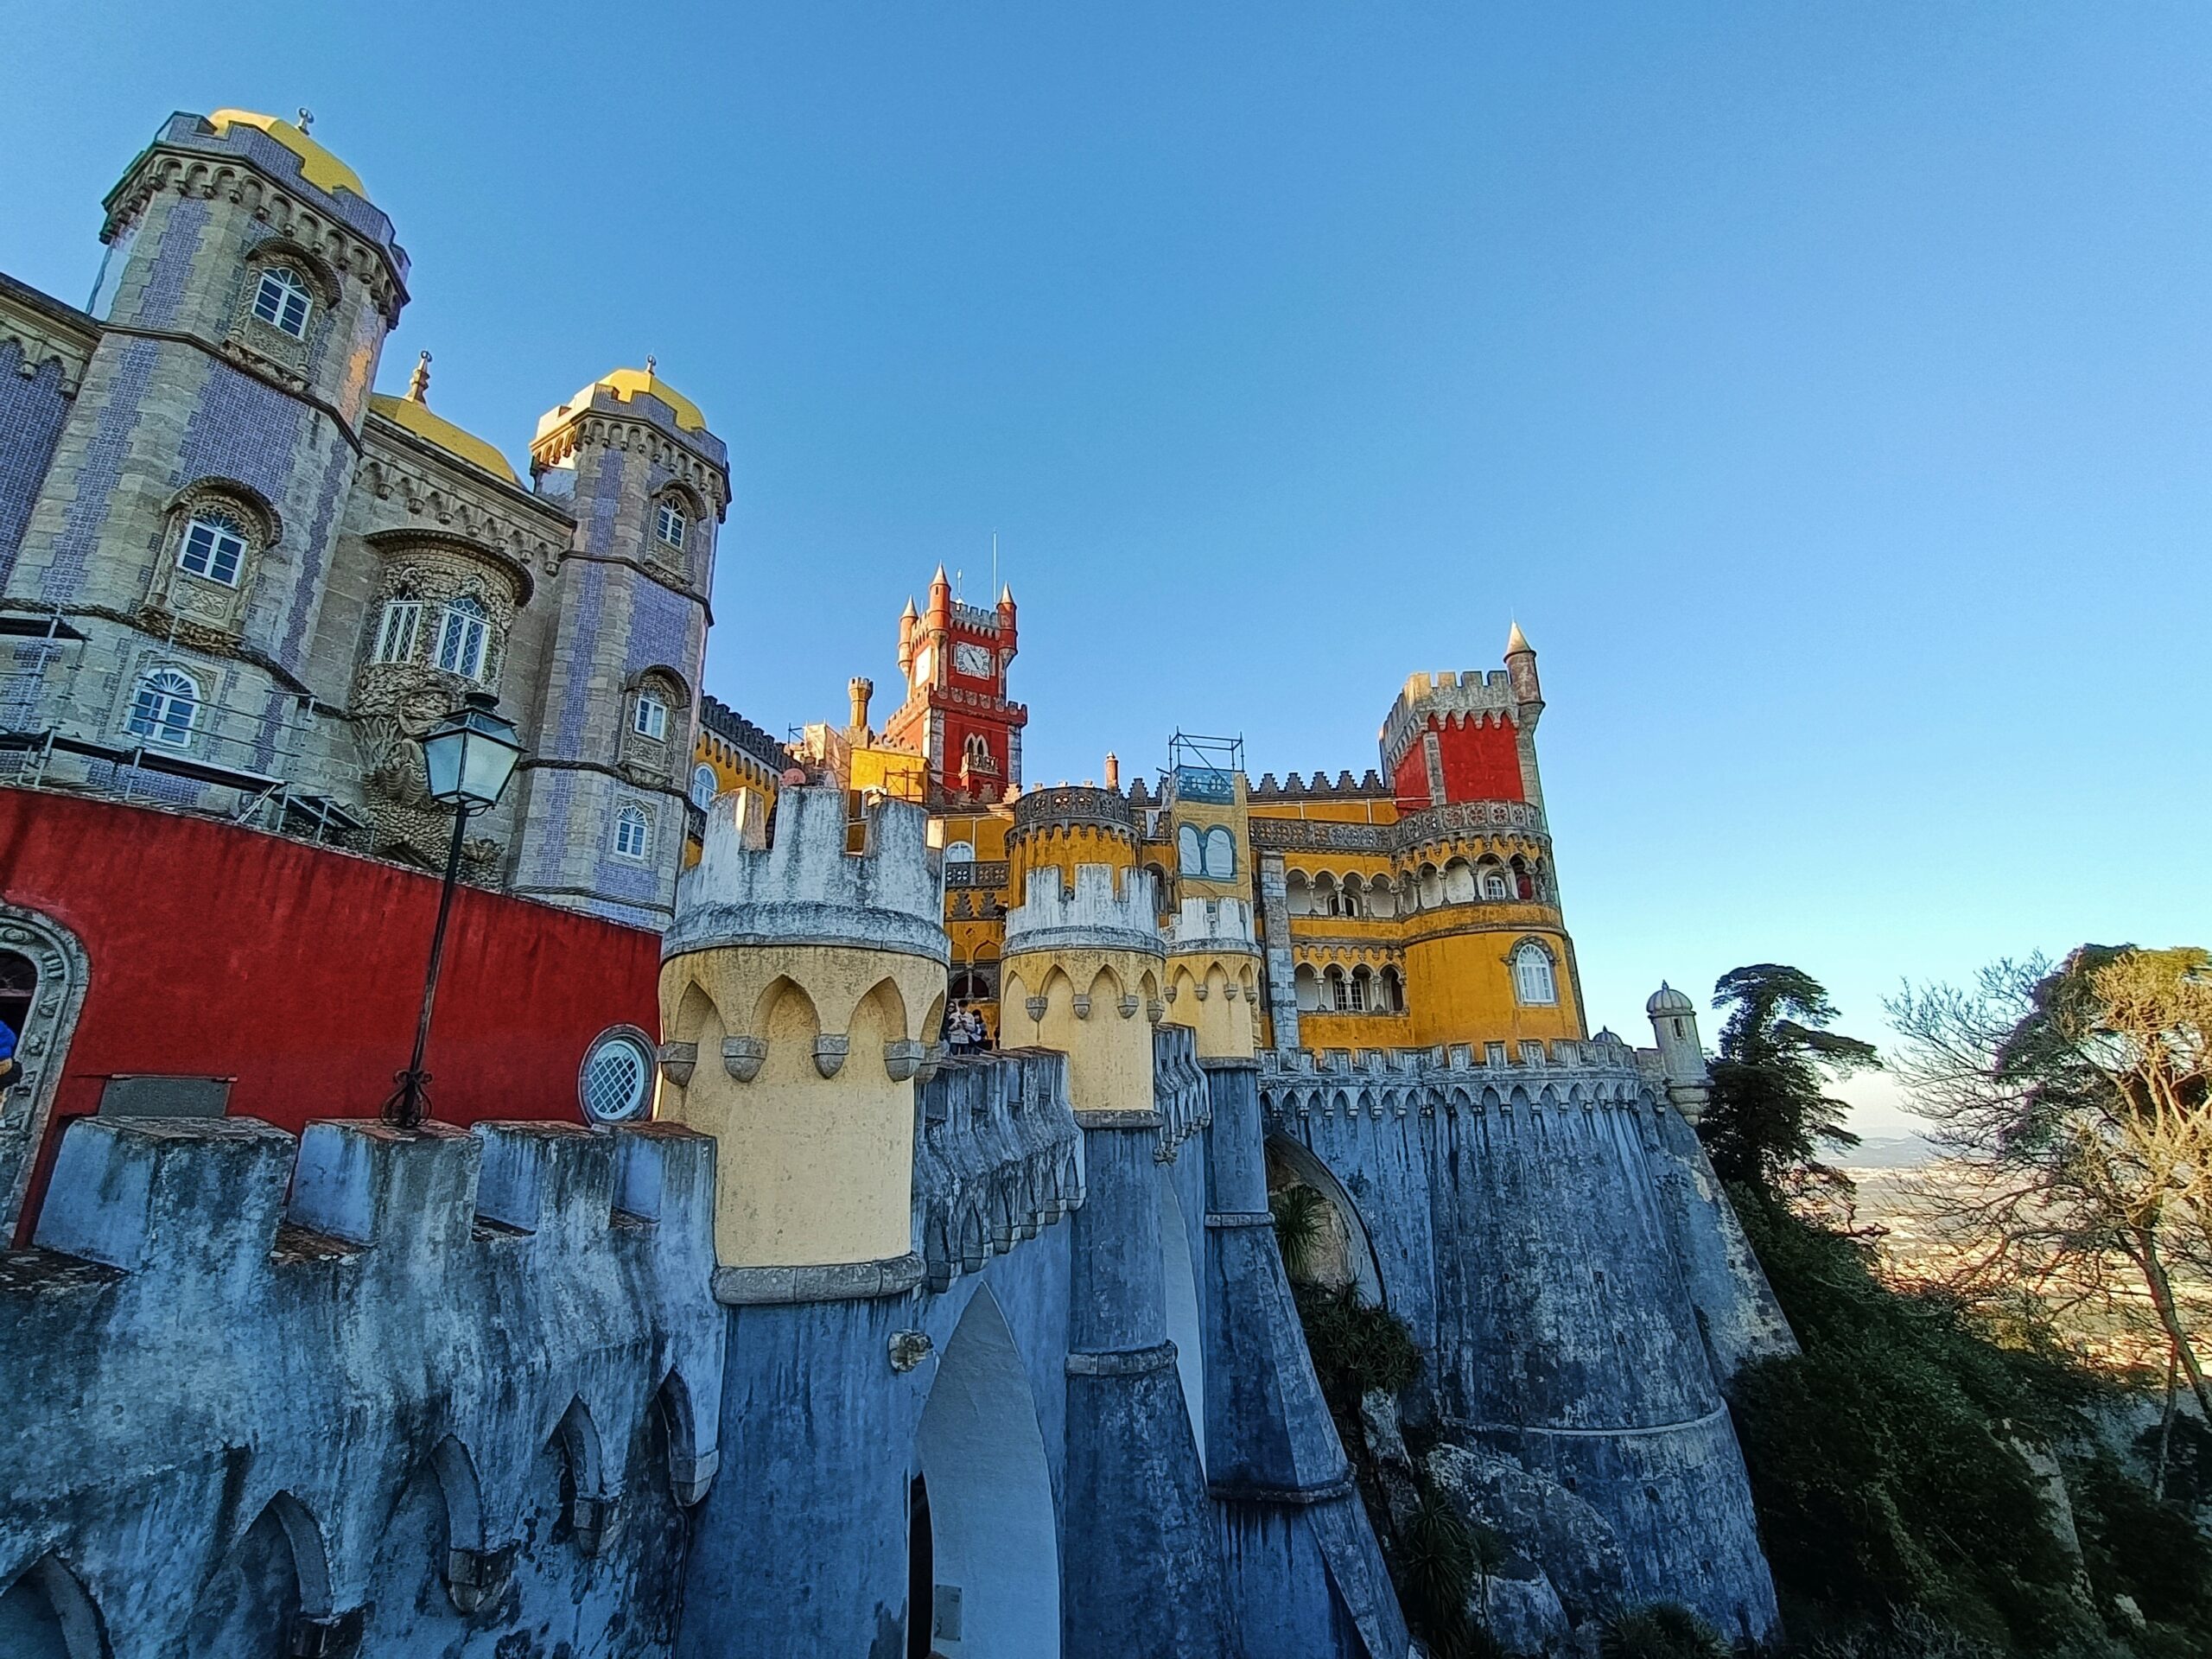 Image show Pena Palace in Sintra